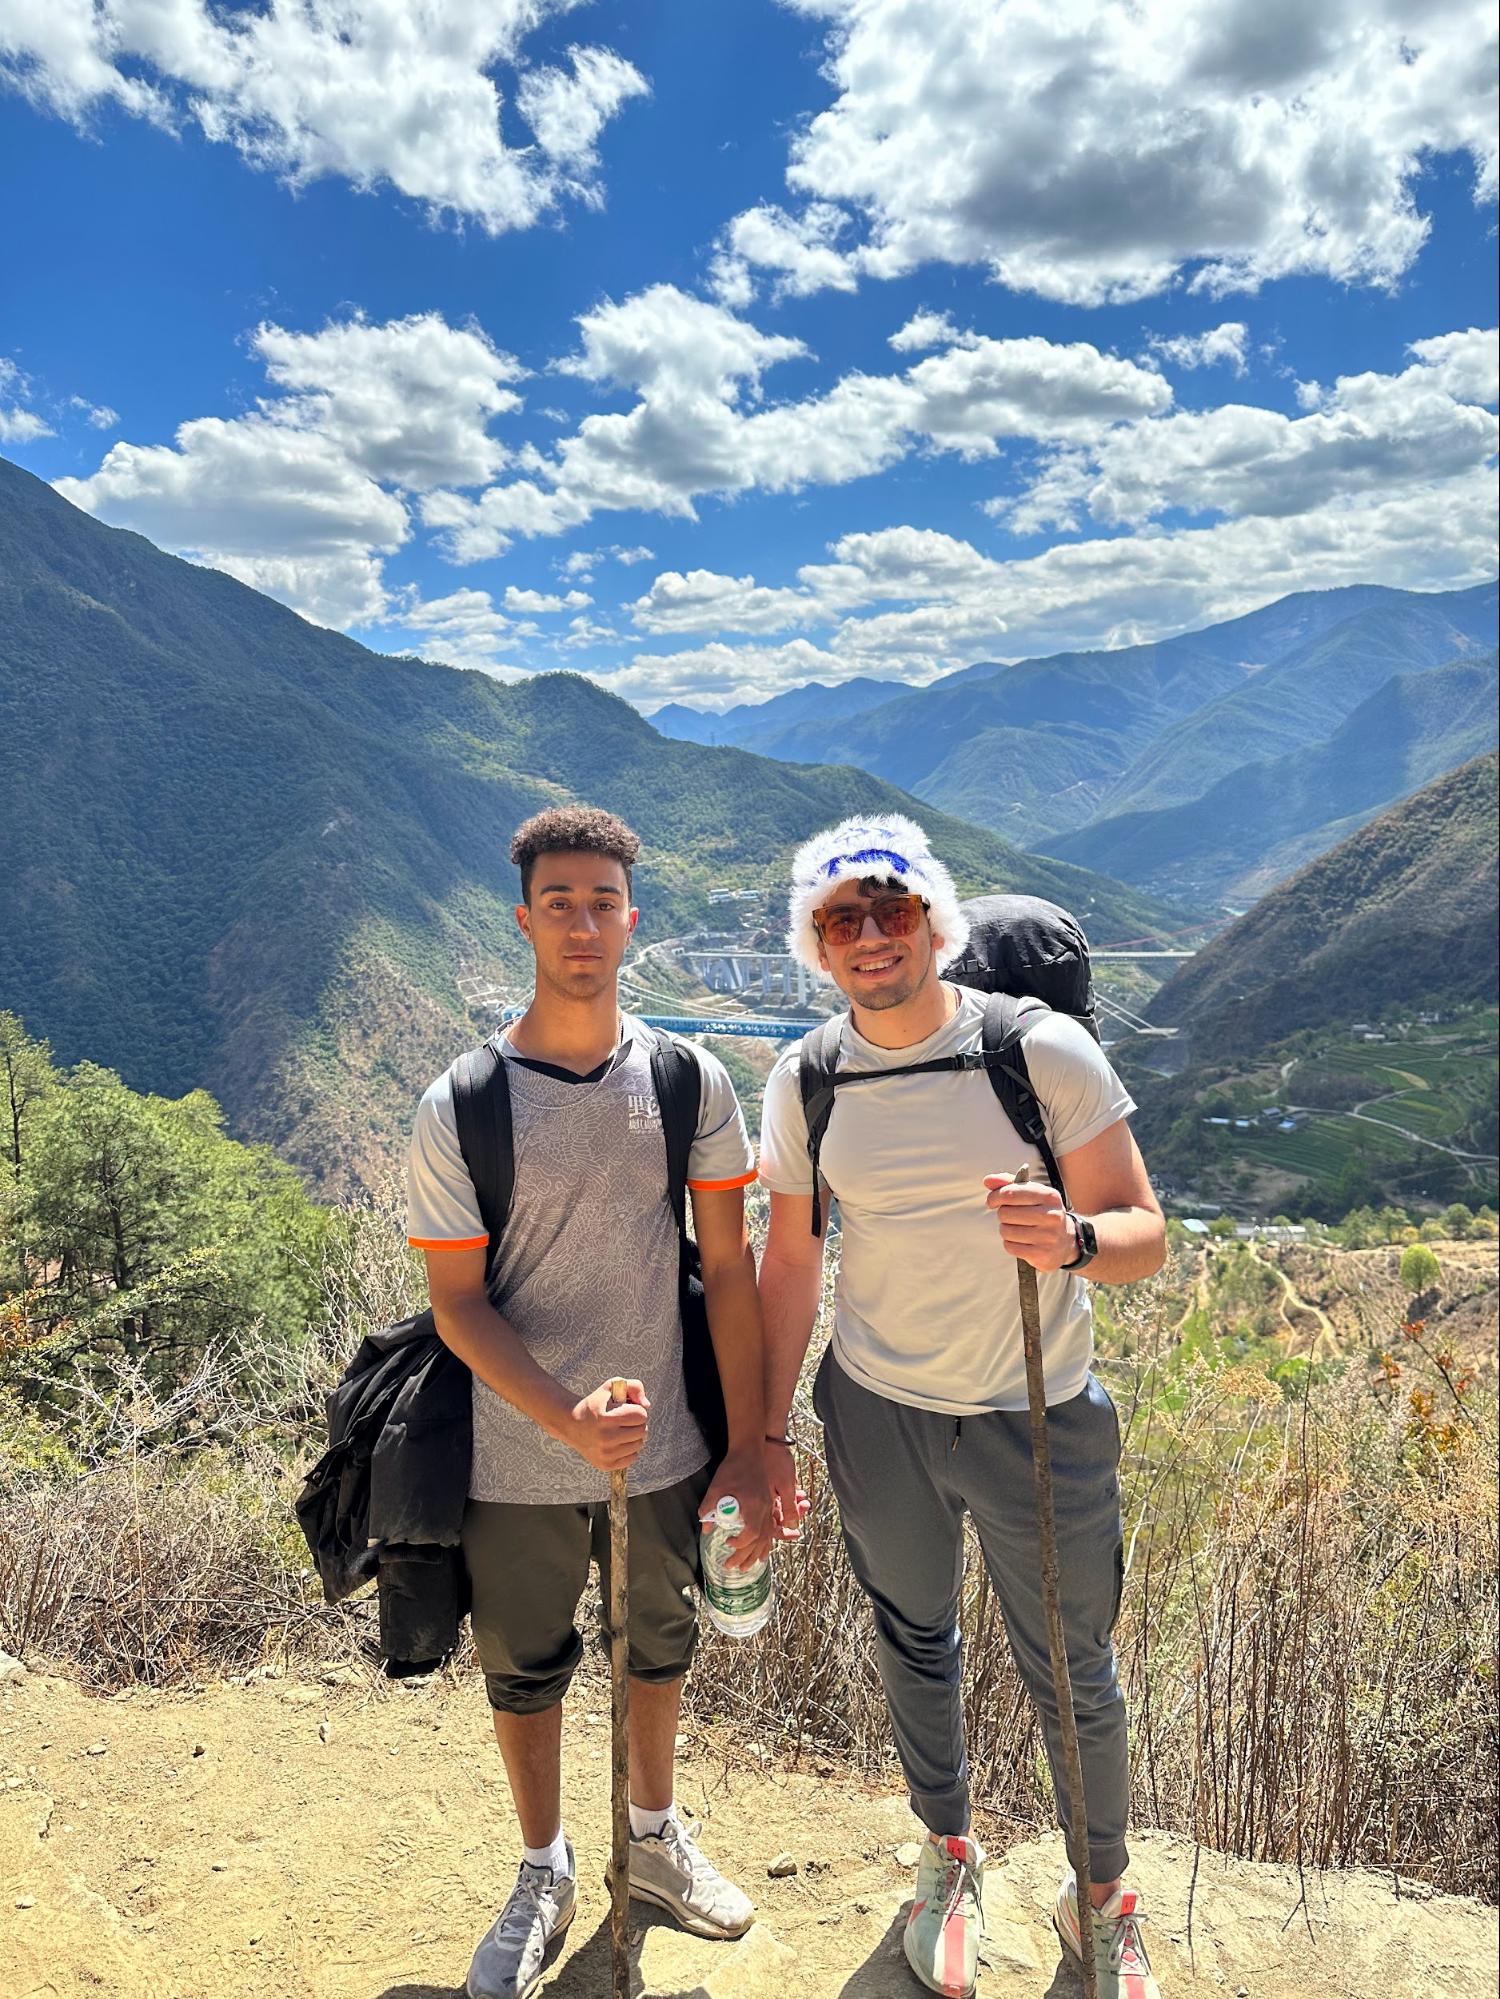 Two men pose with hiking sticks in front of a background of mountains and a cloudy sky